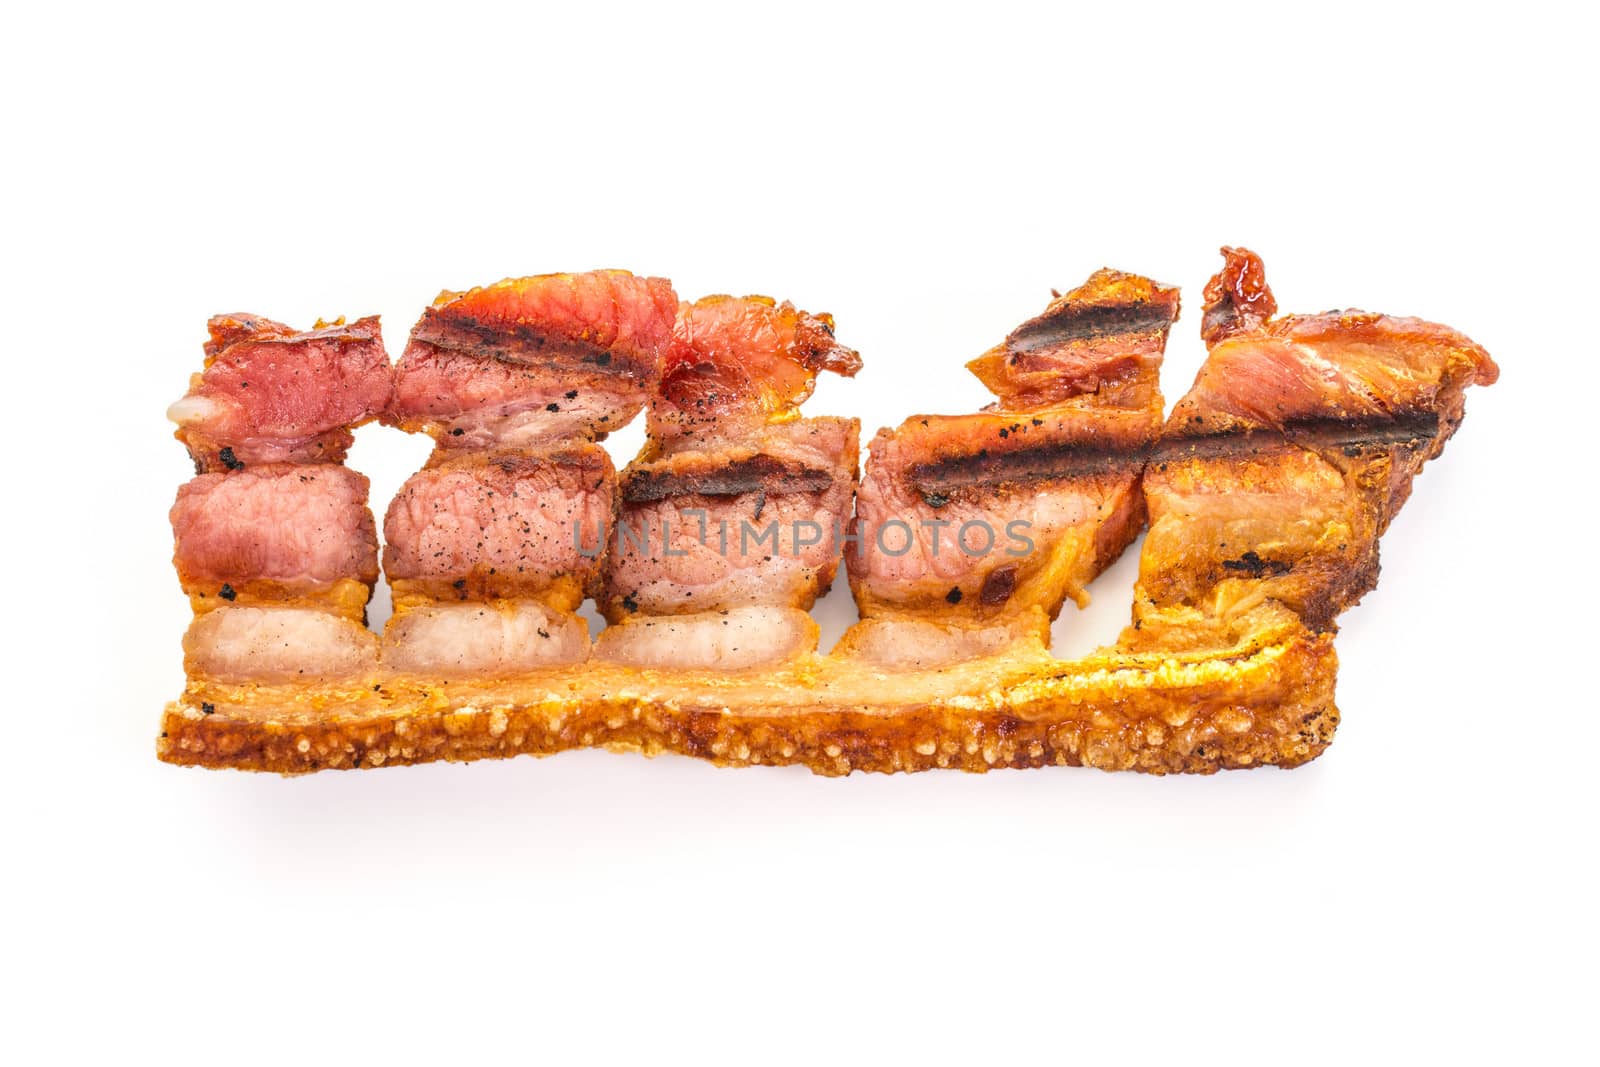 Delicious Rasher of Fried or Grilled Crispy Bacon ready to serve, high key, horizontal shot